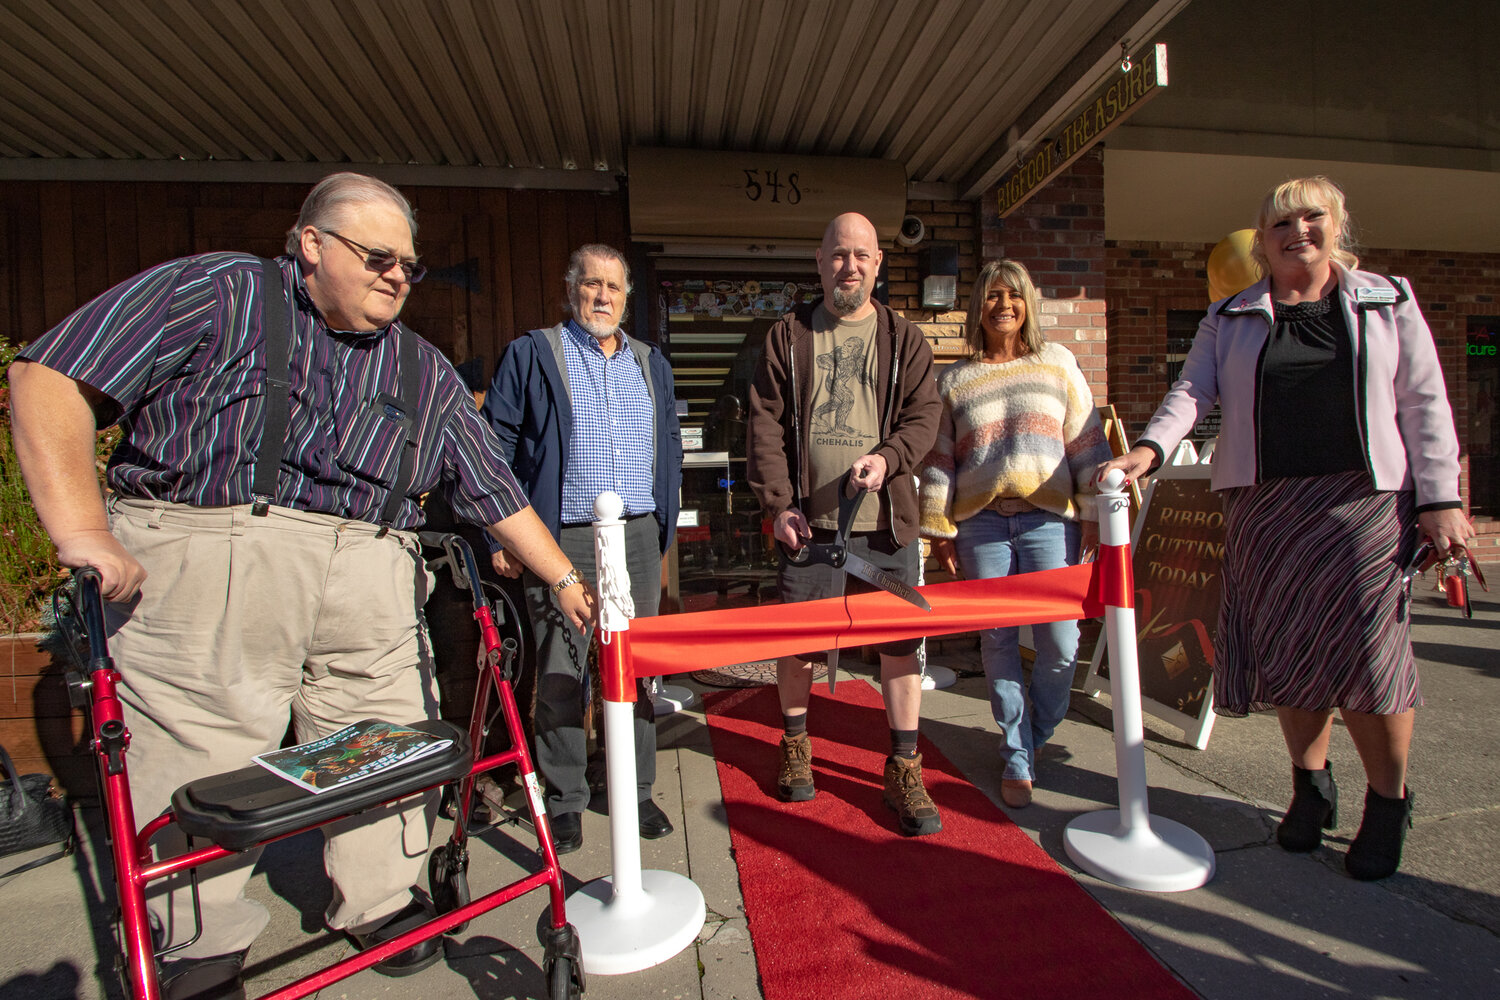 Mitch Moberg, owner of Bigfoot Treasure, prepares to cut the ribbon at his business in downtown Chehalis as Chehalis City Councilor Daryl Lund, left, mayor Tony Ketchum, second from left, and Lindy Waring and Christine Brower look on.